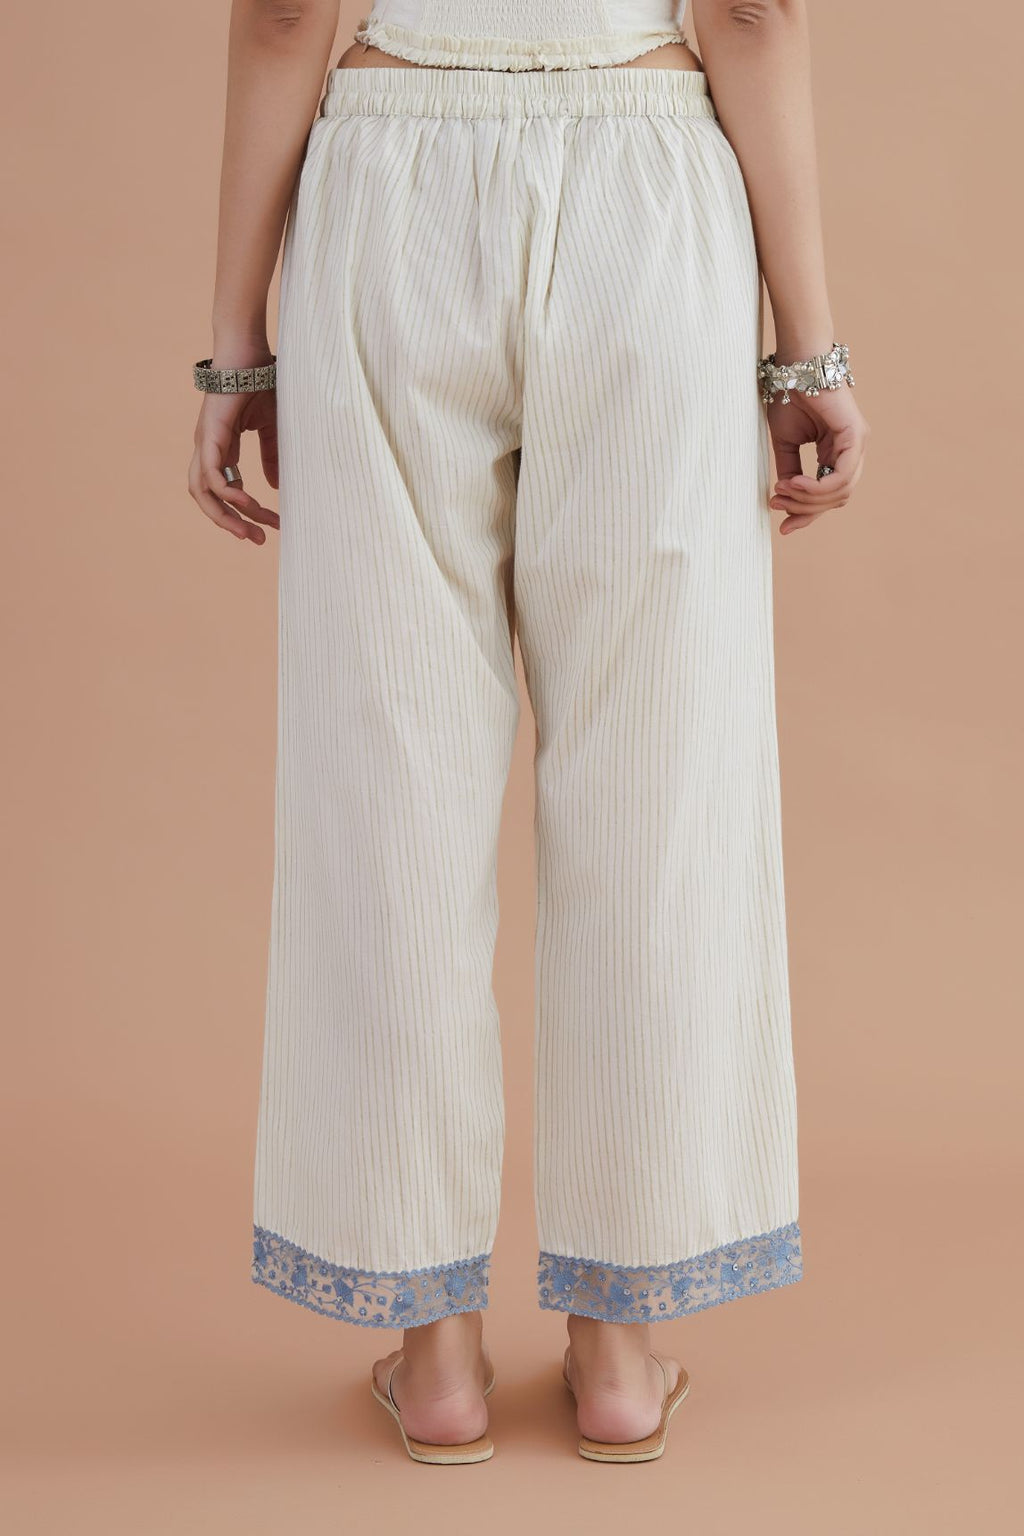 Off white straight pants detailed with blue embroidery at bottom.